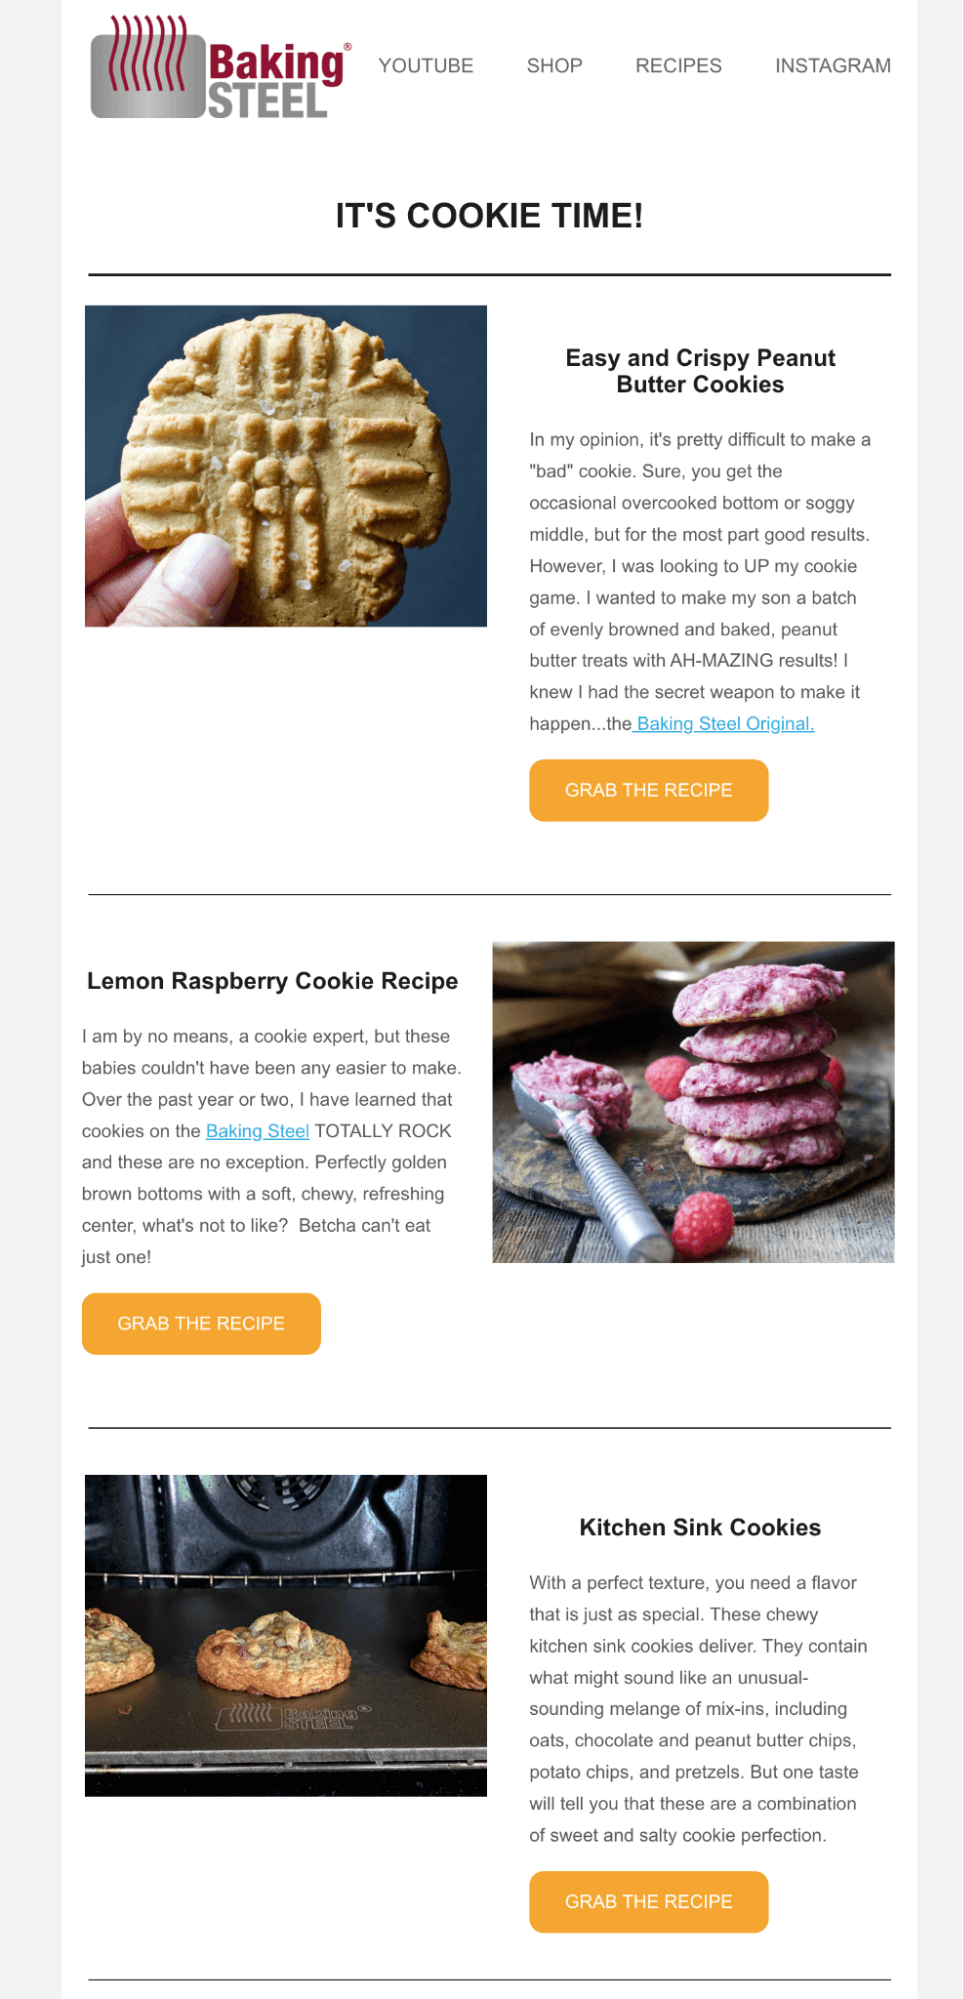 welcome email subject line example: To all you cookie monsters!